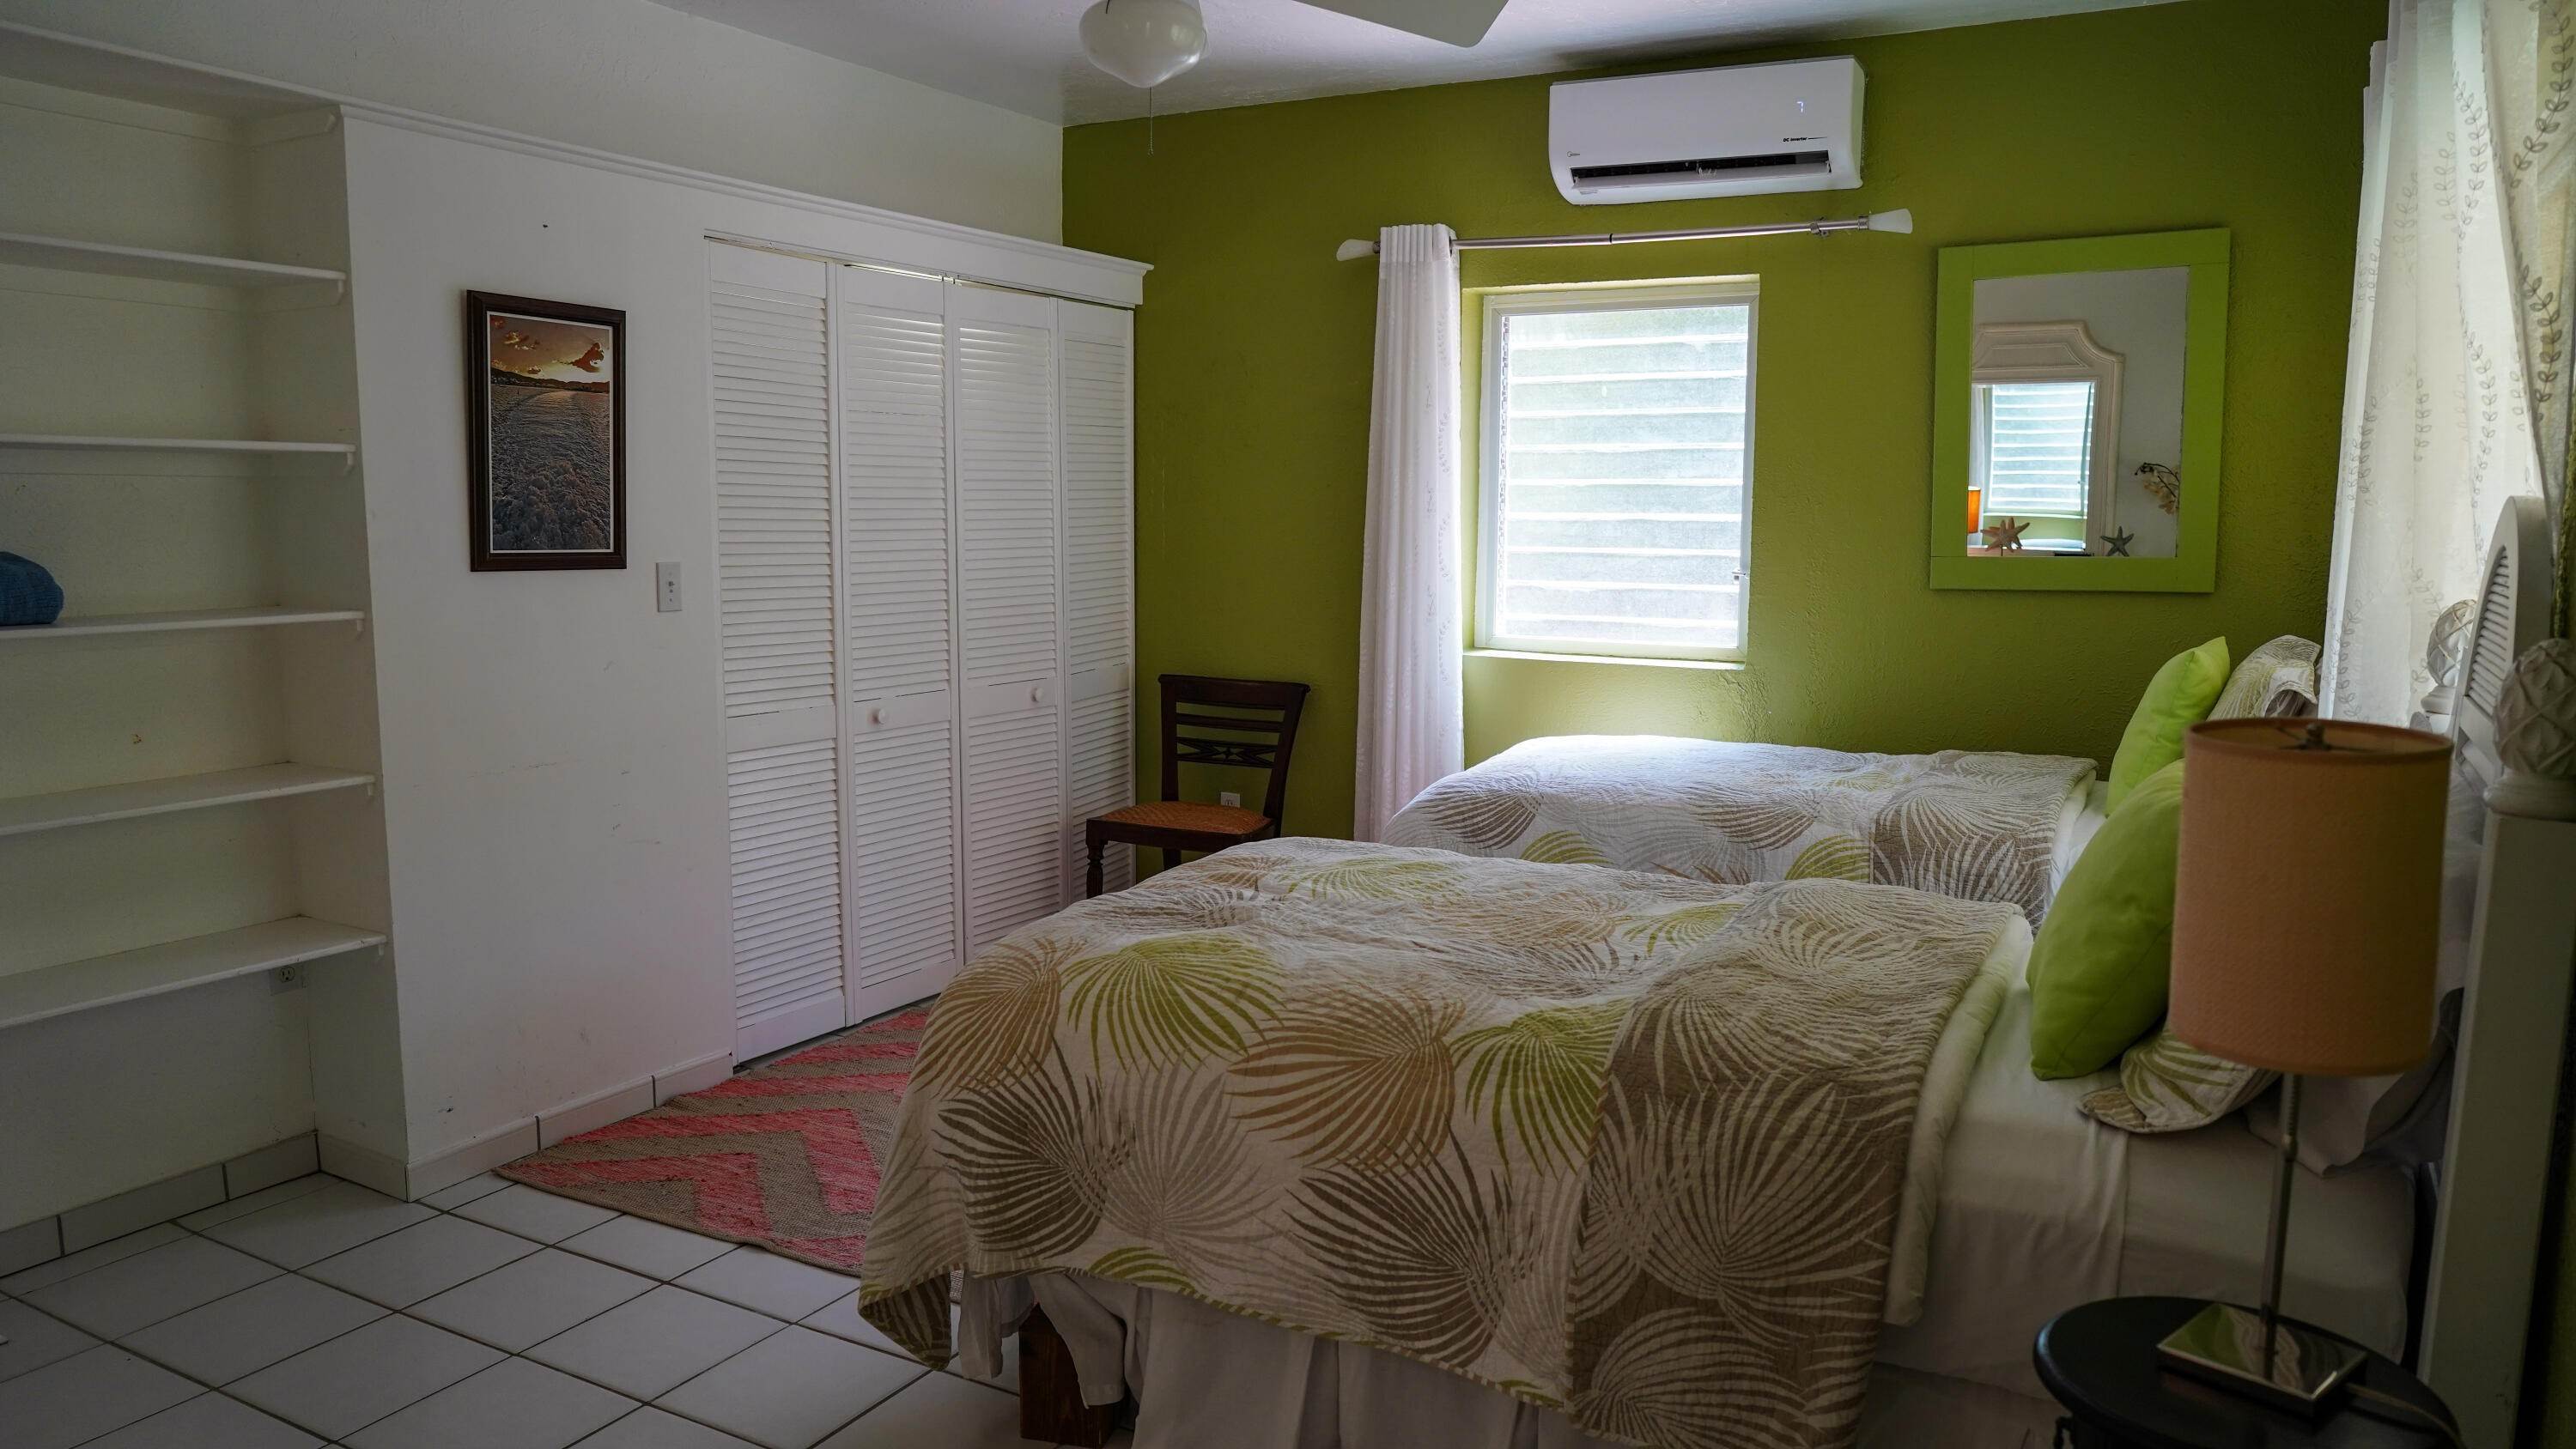 49. Single Family Homes for Sale at 7 North Slob EB St Croix, Virgin Islands 00820 United States Virgin Islands